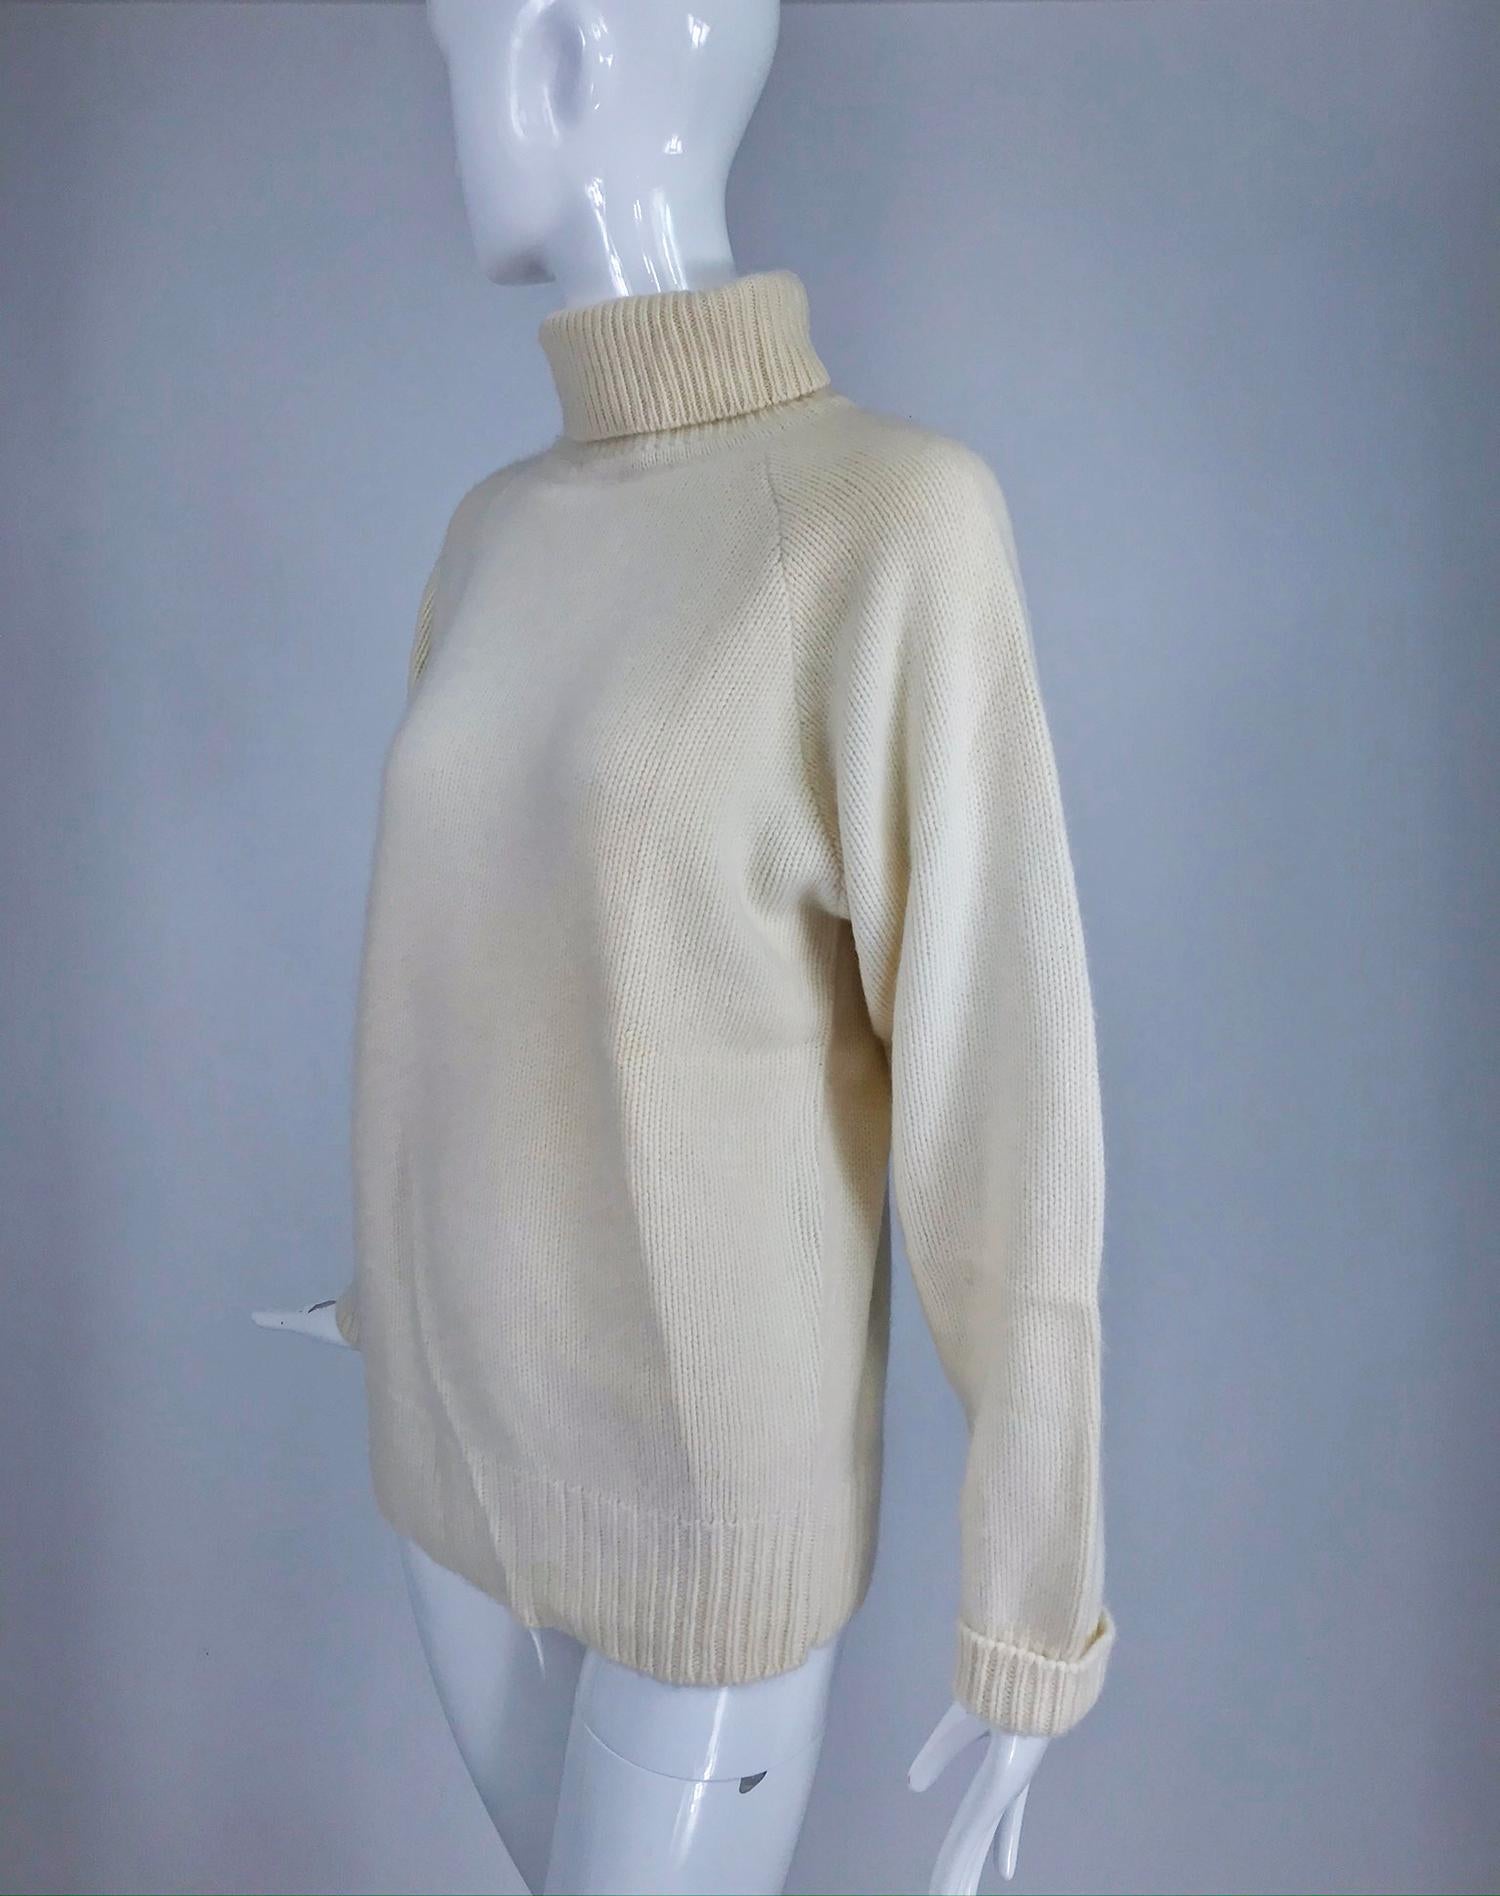 Zoran off white chunky cashmere turtleneck sweater from the 1990s. Pull on sweater with raglan sleeves. Neck, cuffs and hem of ribbed knit. This sweater has been packed away in cold storage for a while, the creases seen in the photos will fall out